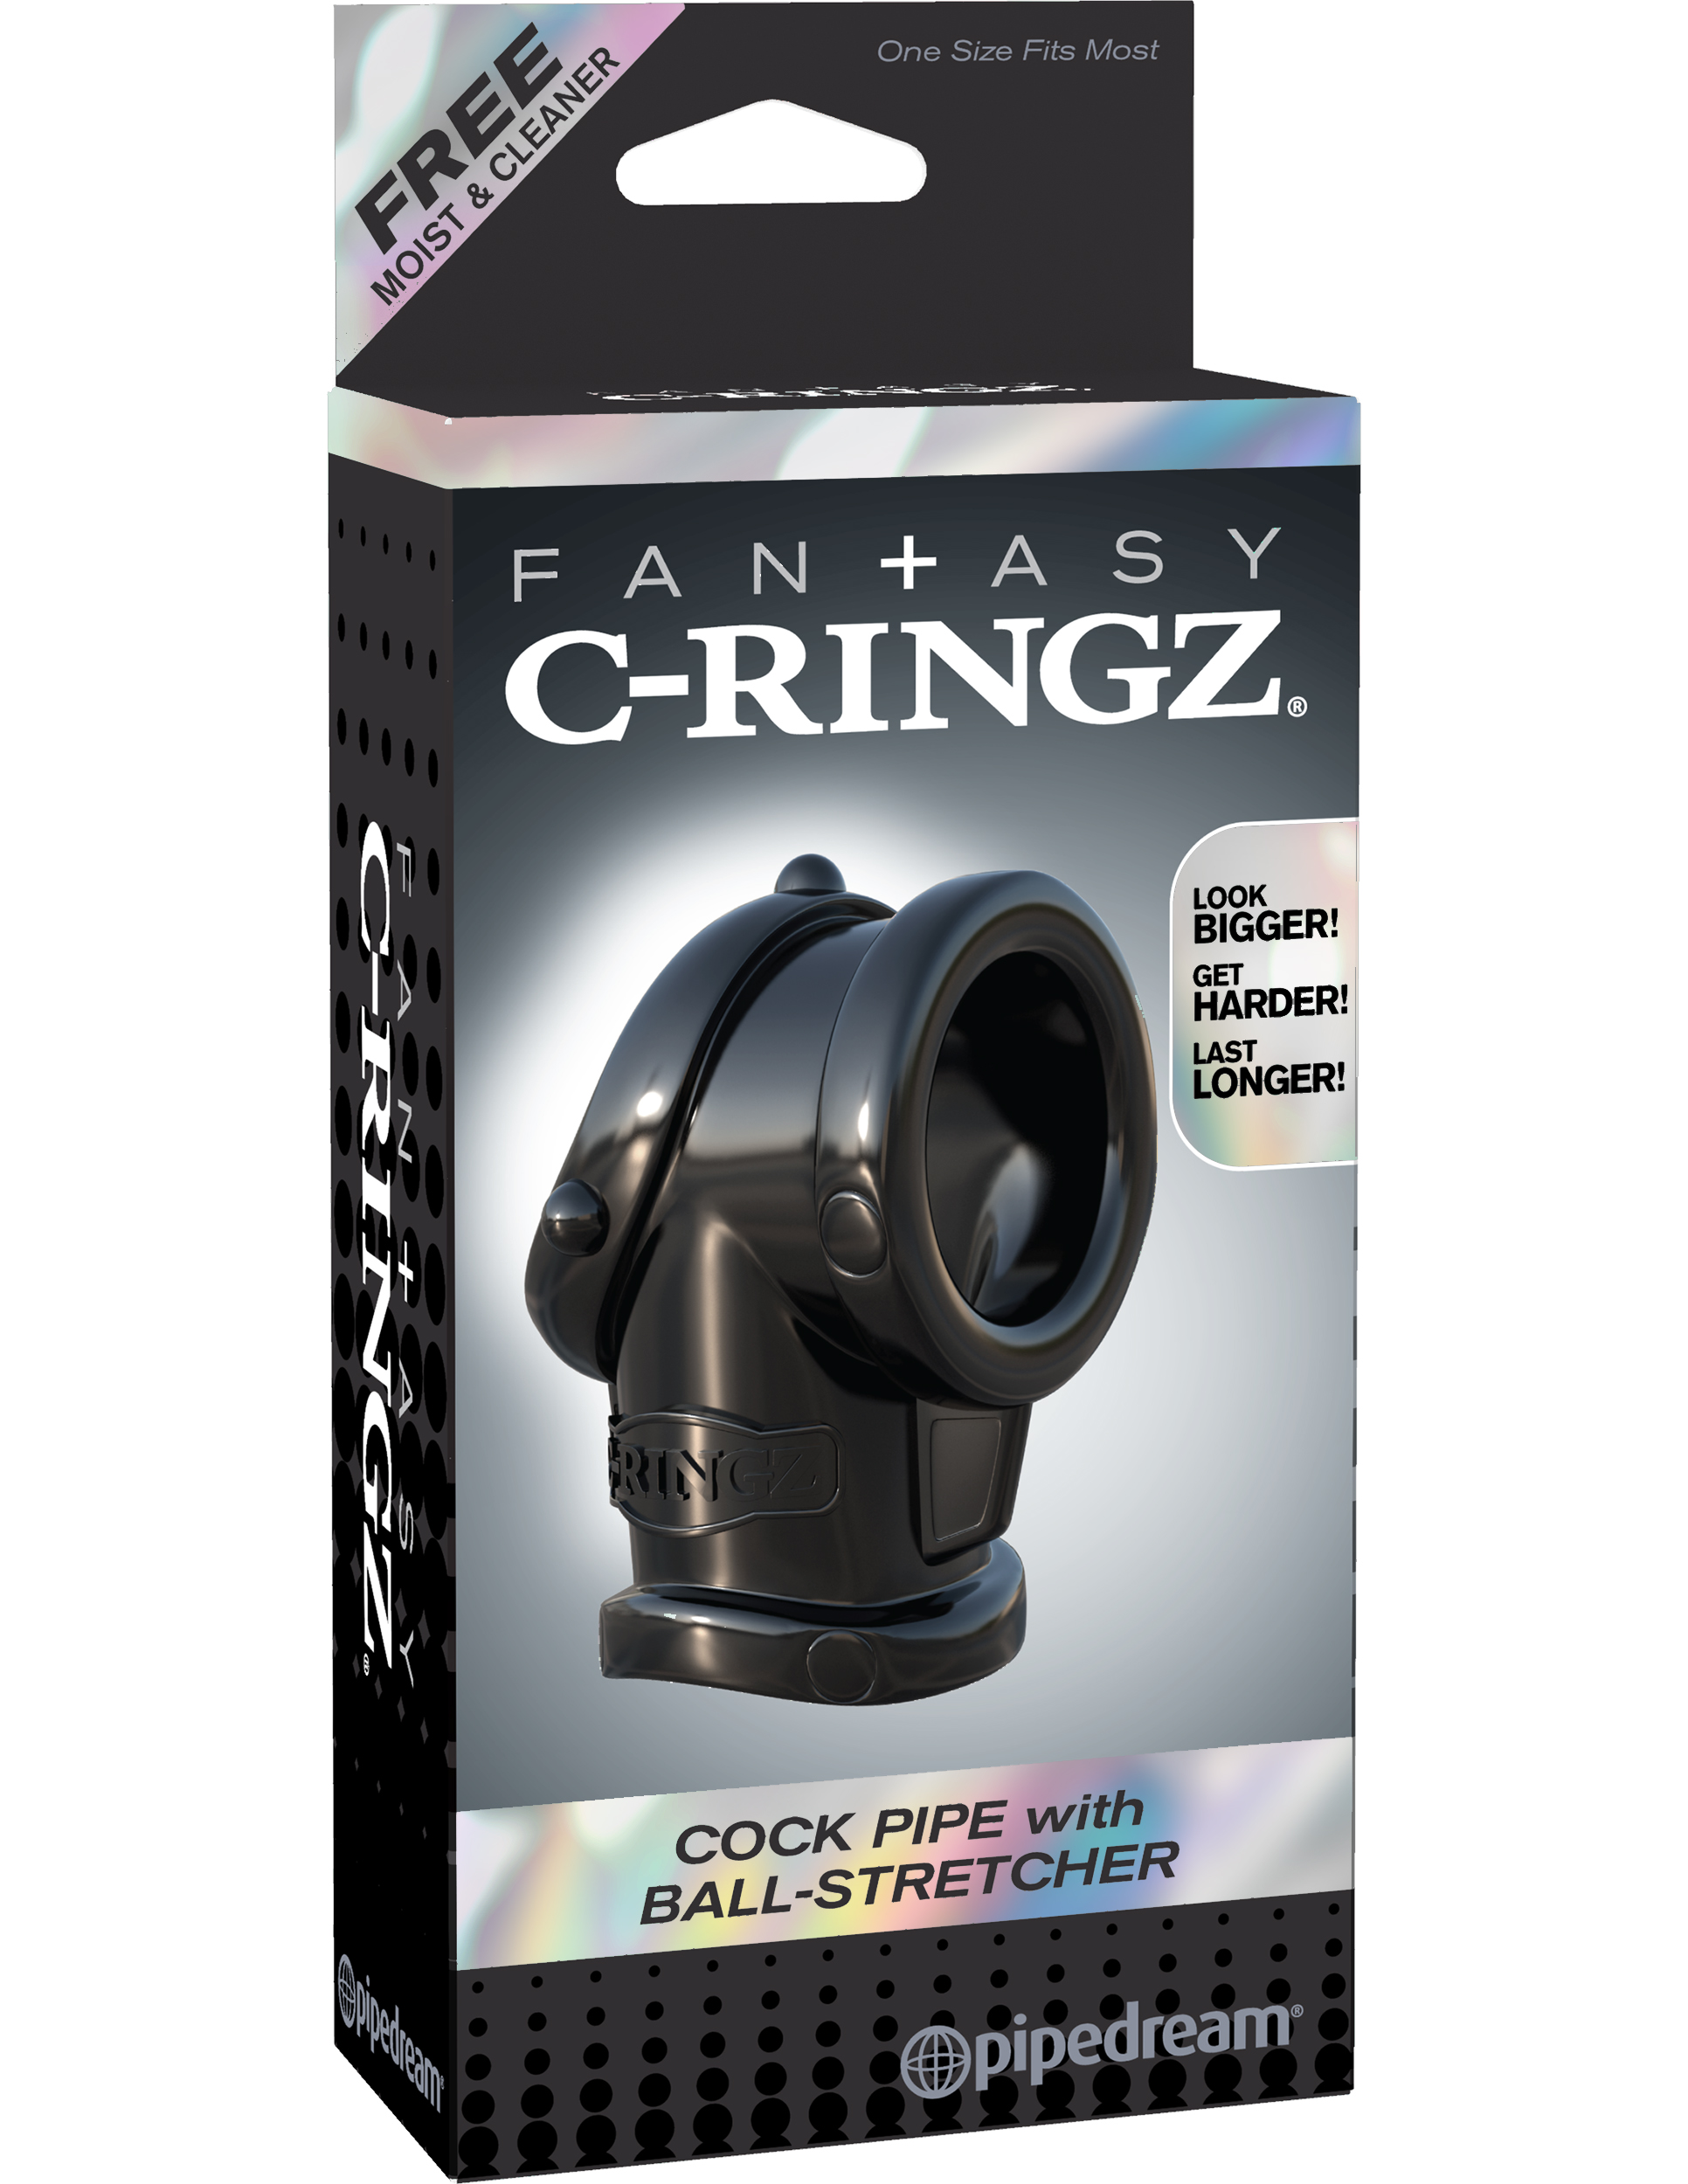 C-Ringz - Cock Pipe with Ball-Stretcher